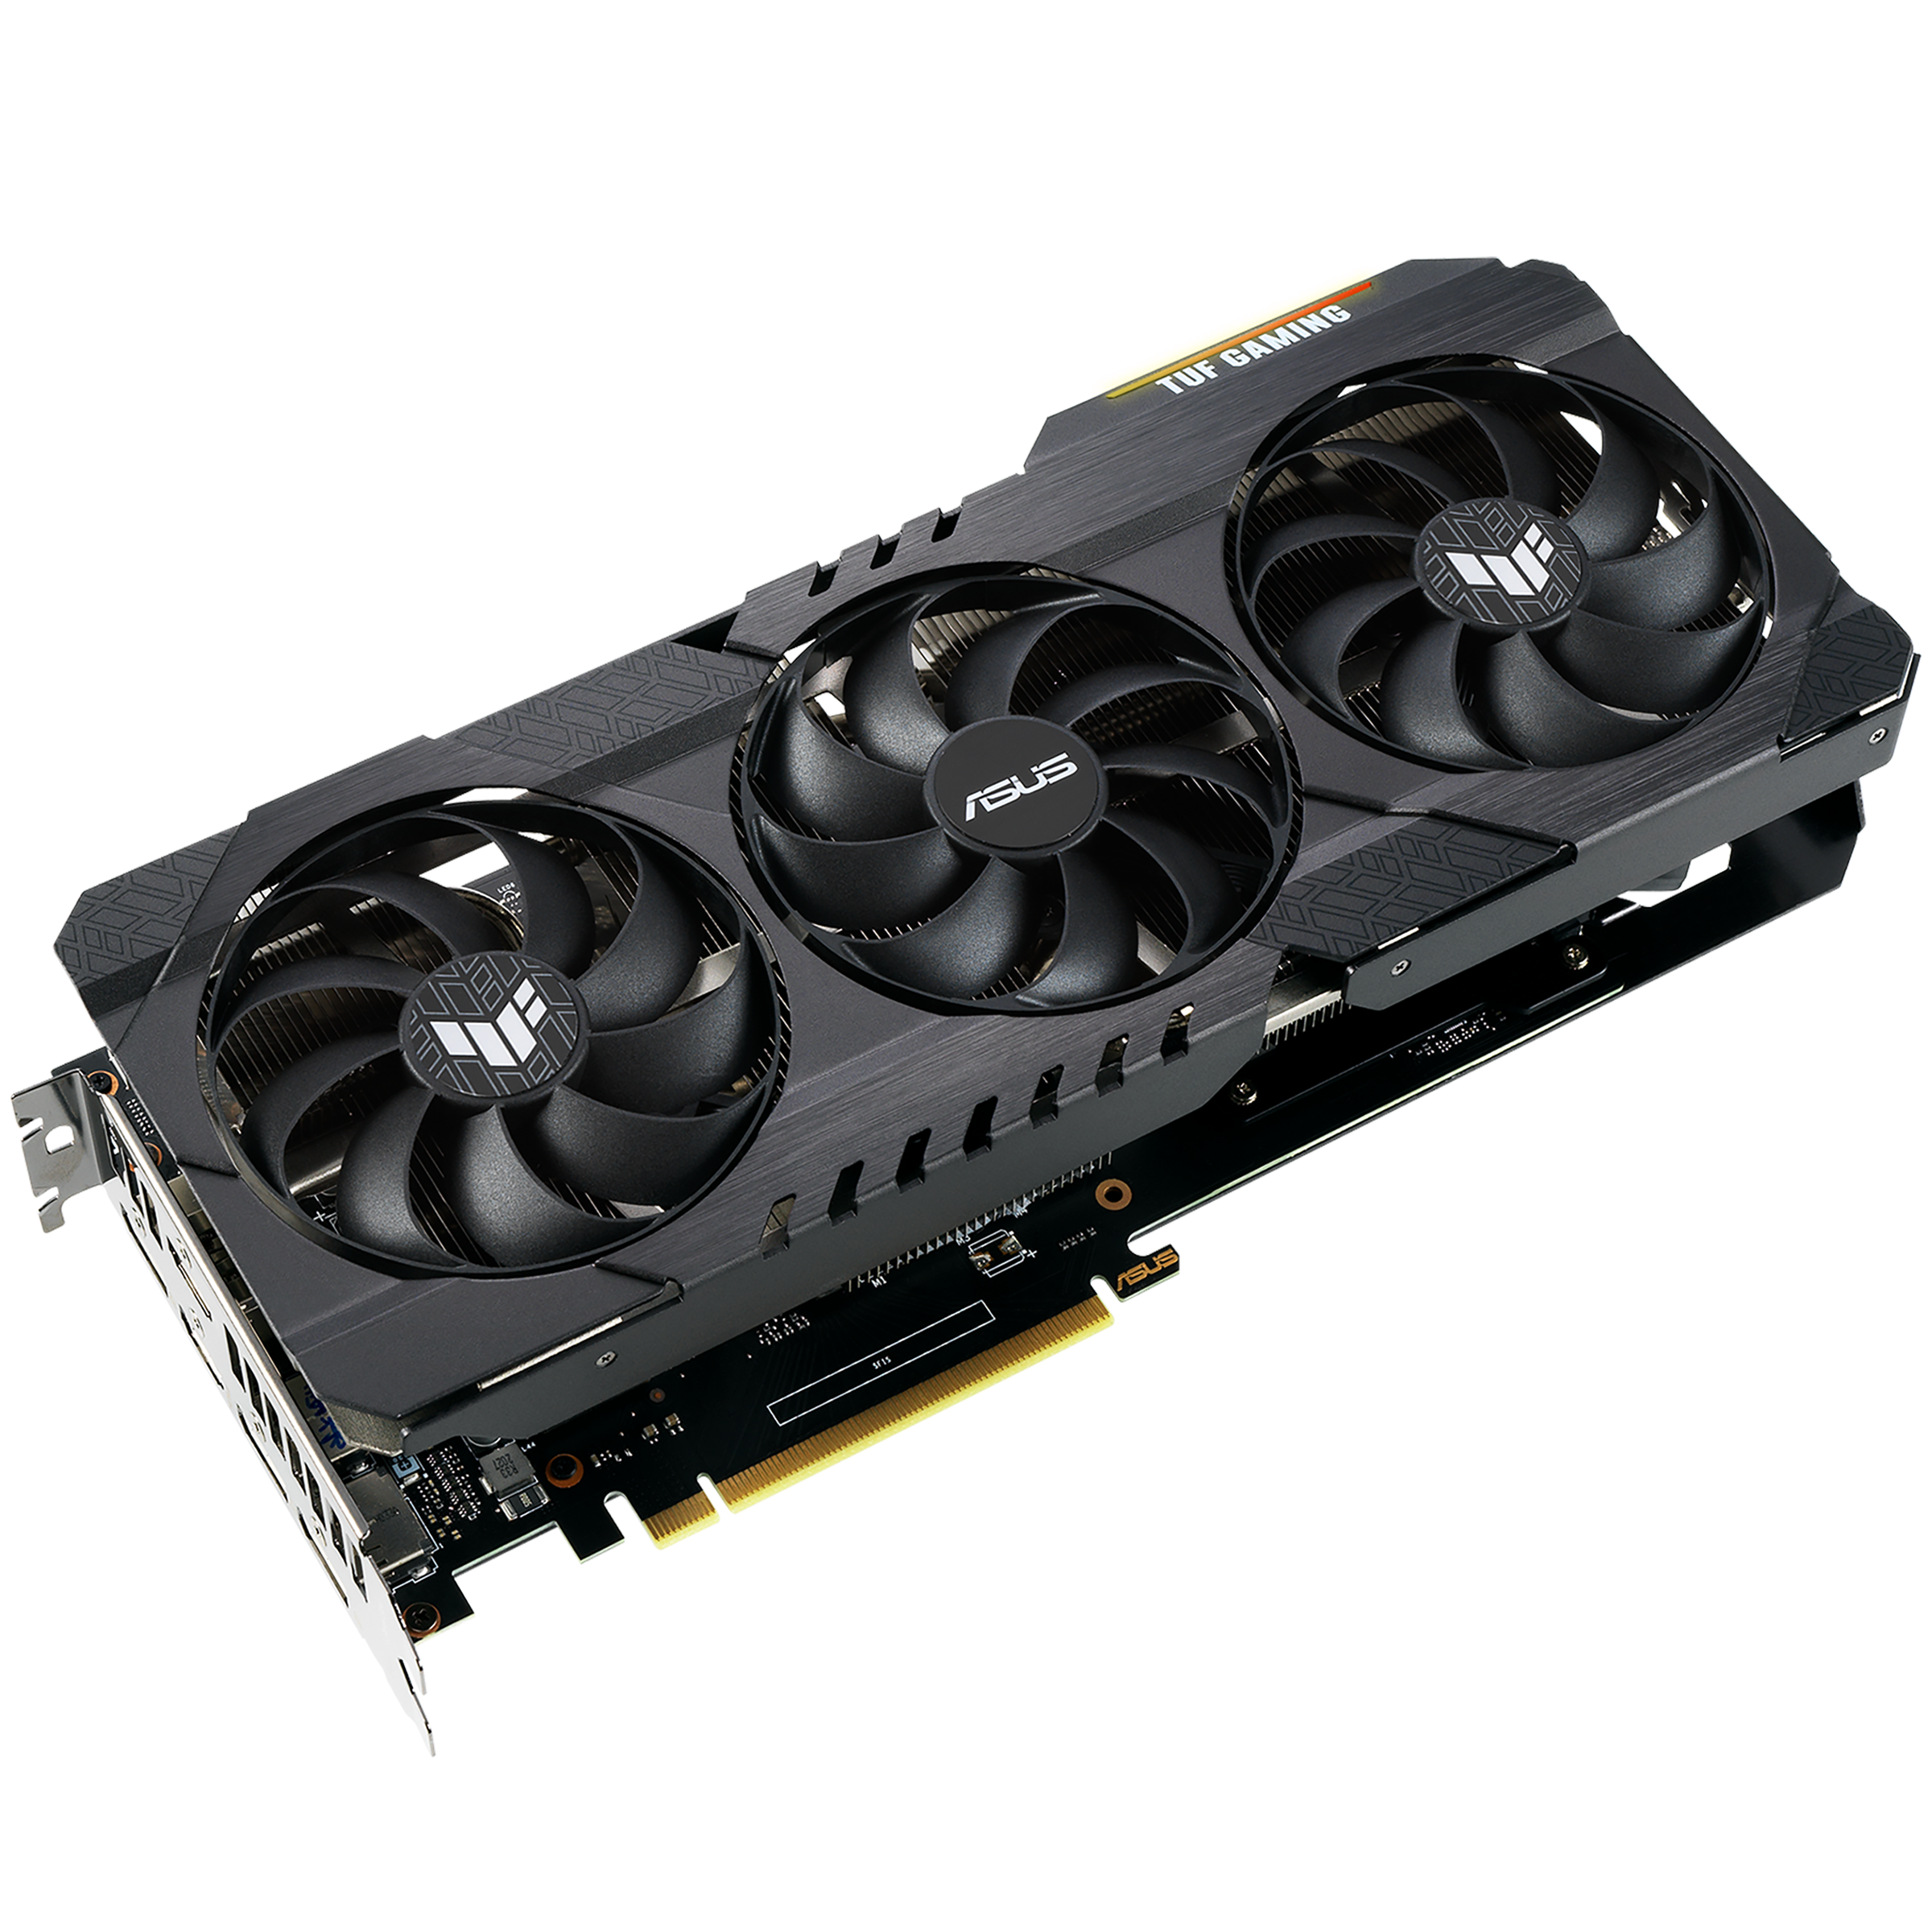 TUF-RTX3060-O12G-V2-GAMING｜Graphics Cards｜ASUS Philippines